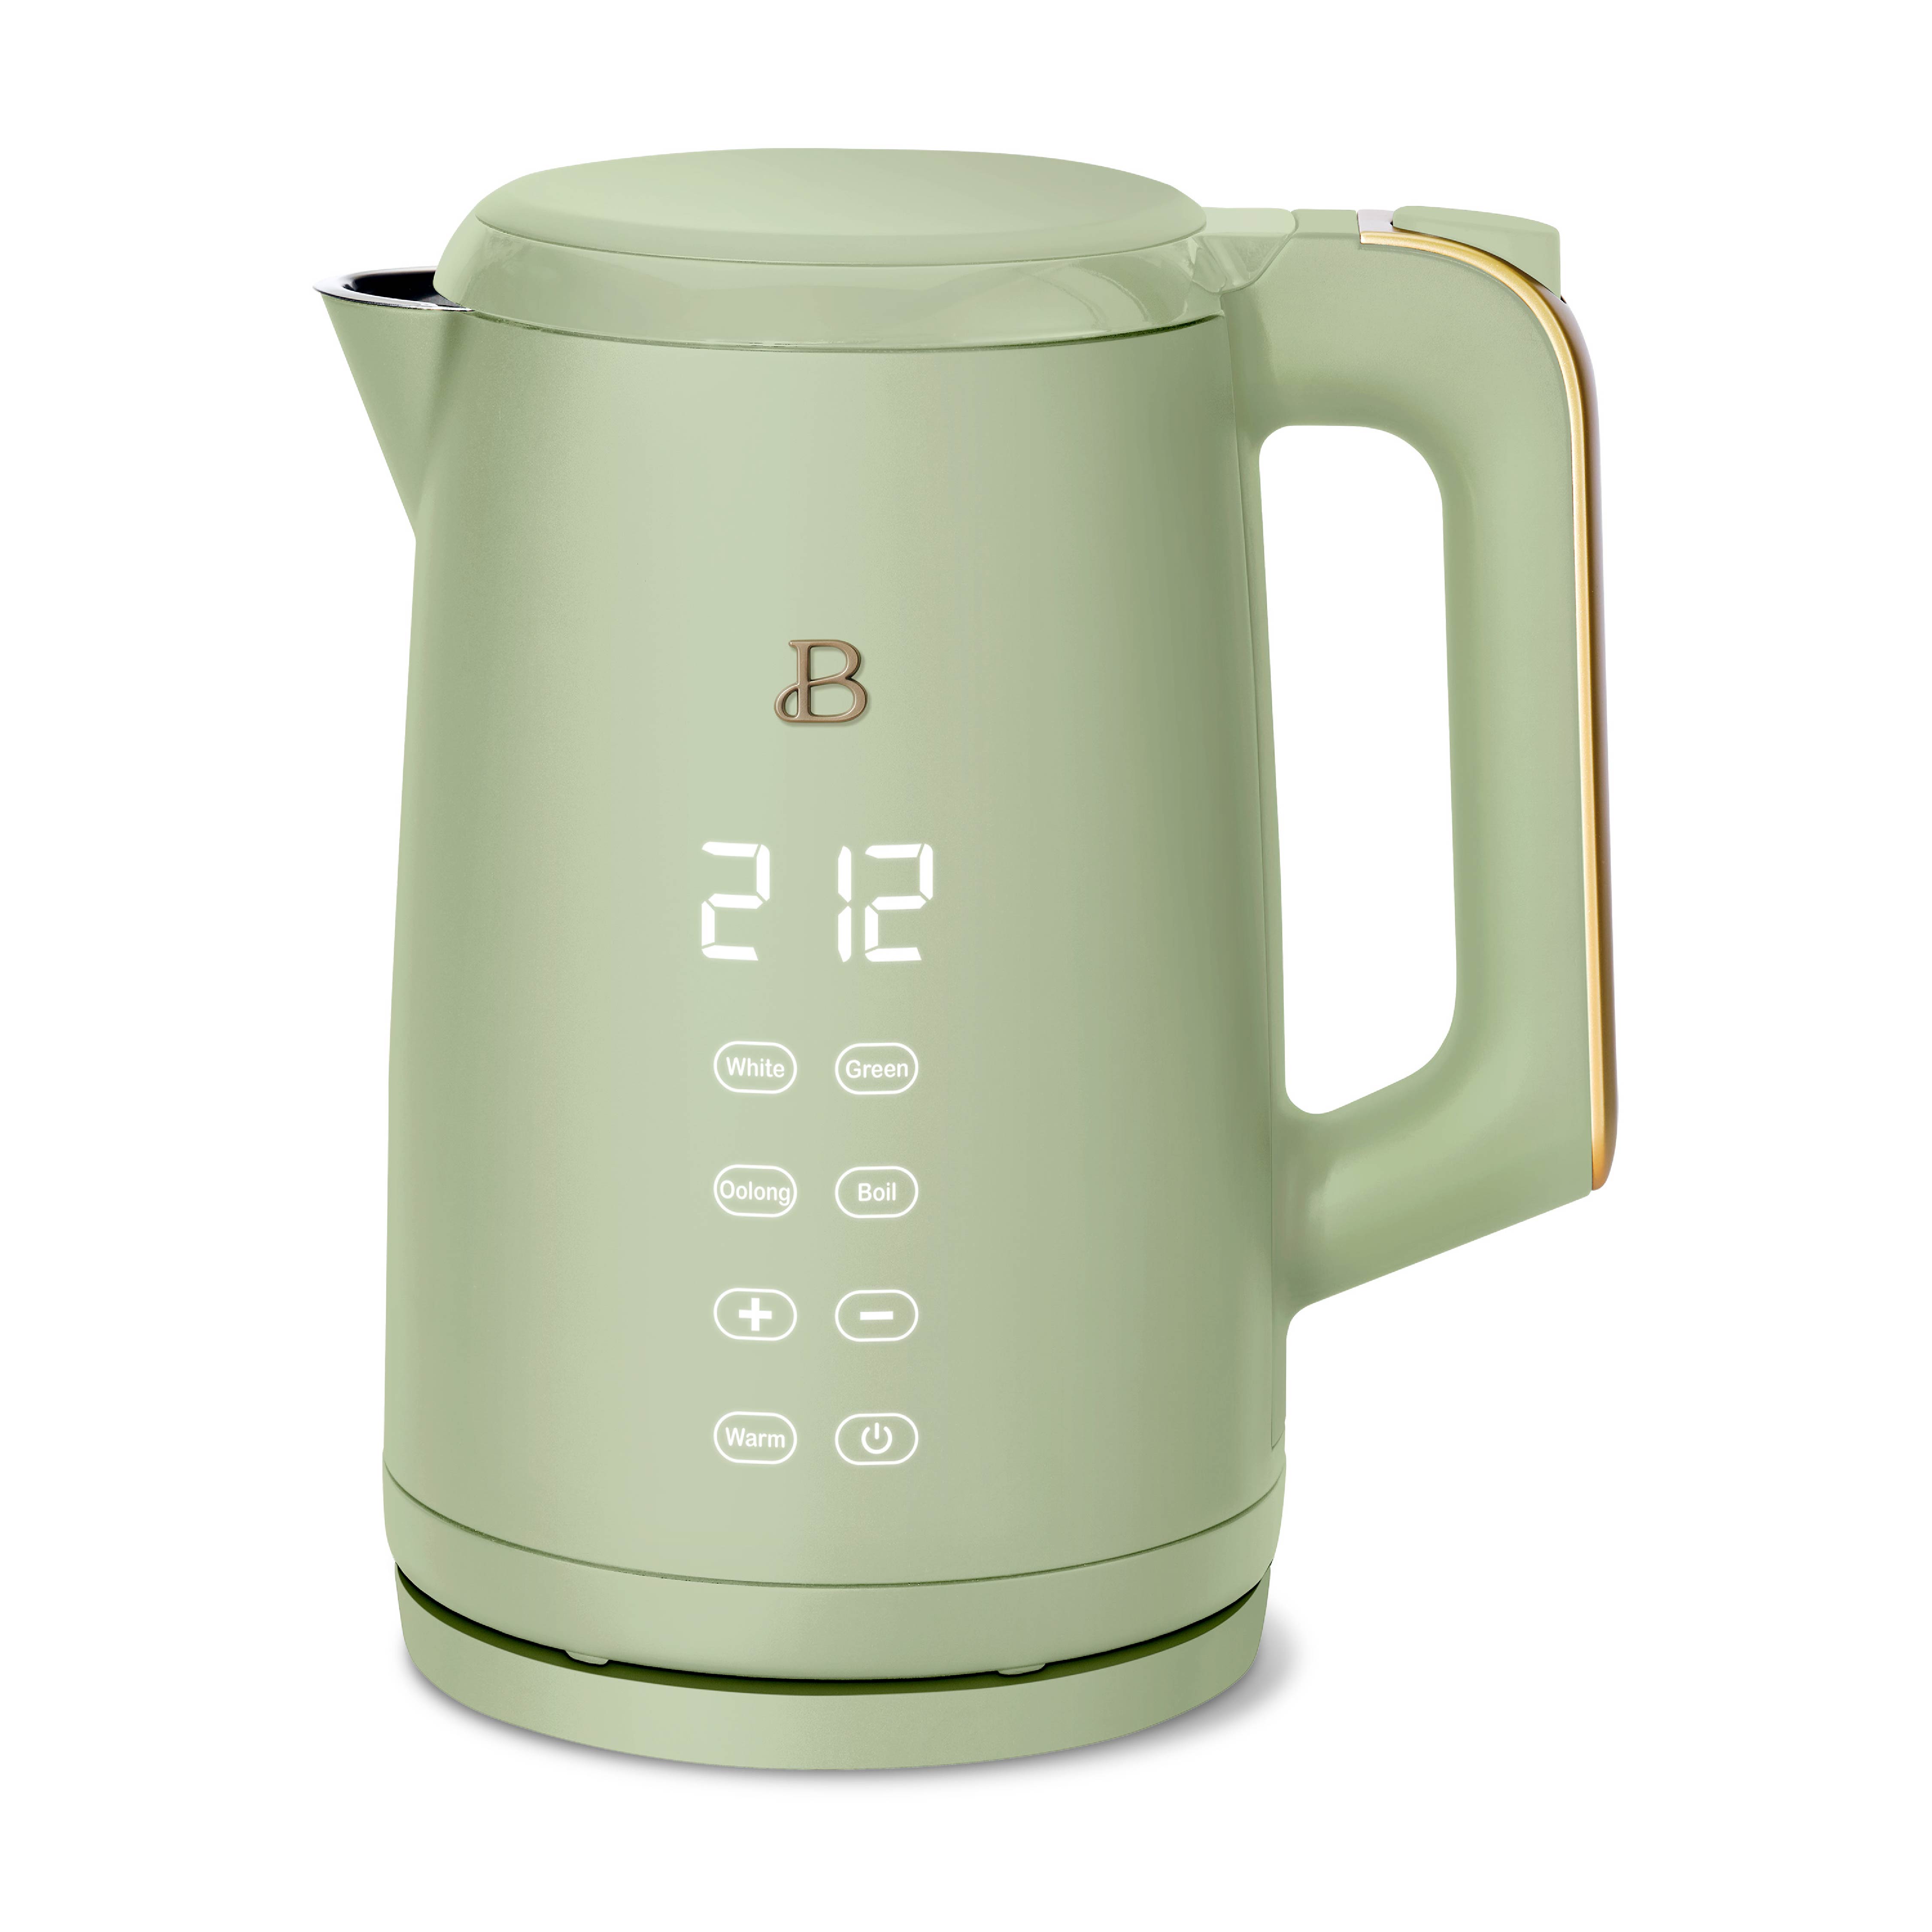 Beautiful 1.7-Liter Electric Kettle 1500 W with One-Touch Activation, Sage Green by Drew Barrymore - image 1 of 8